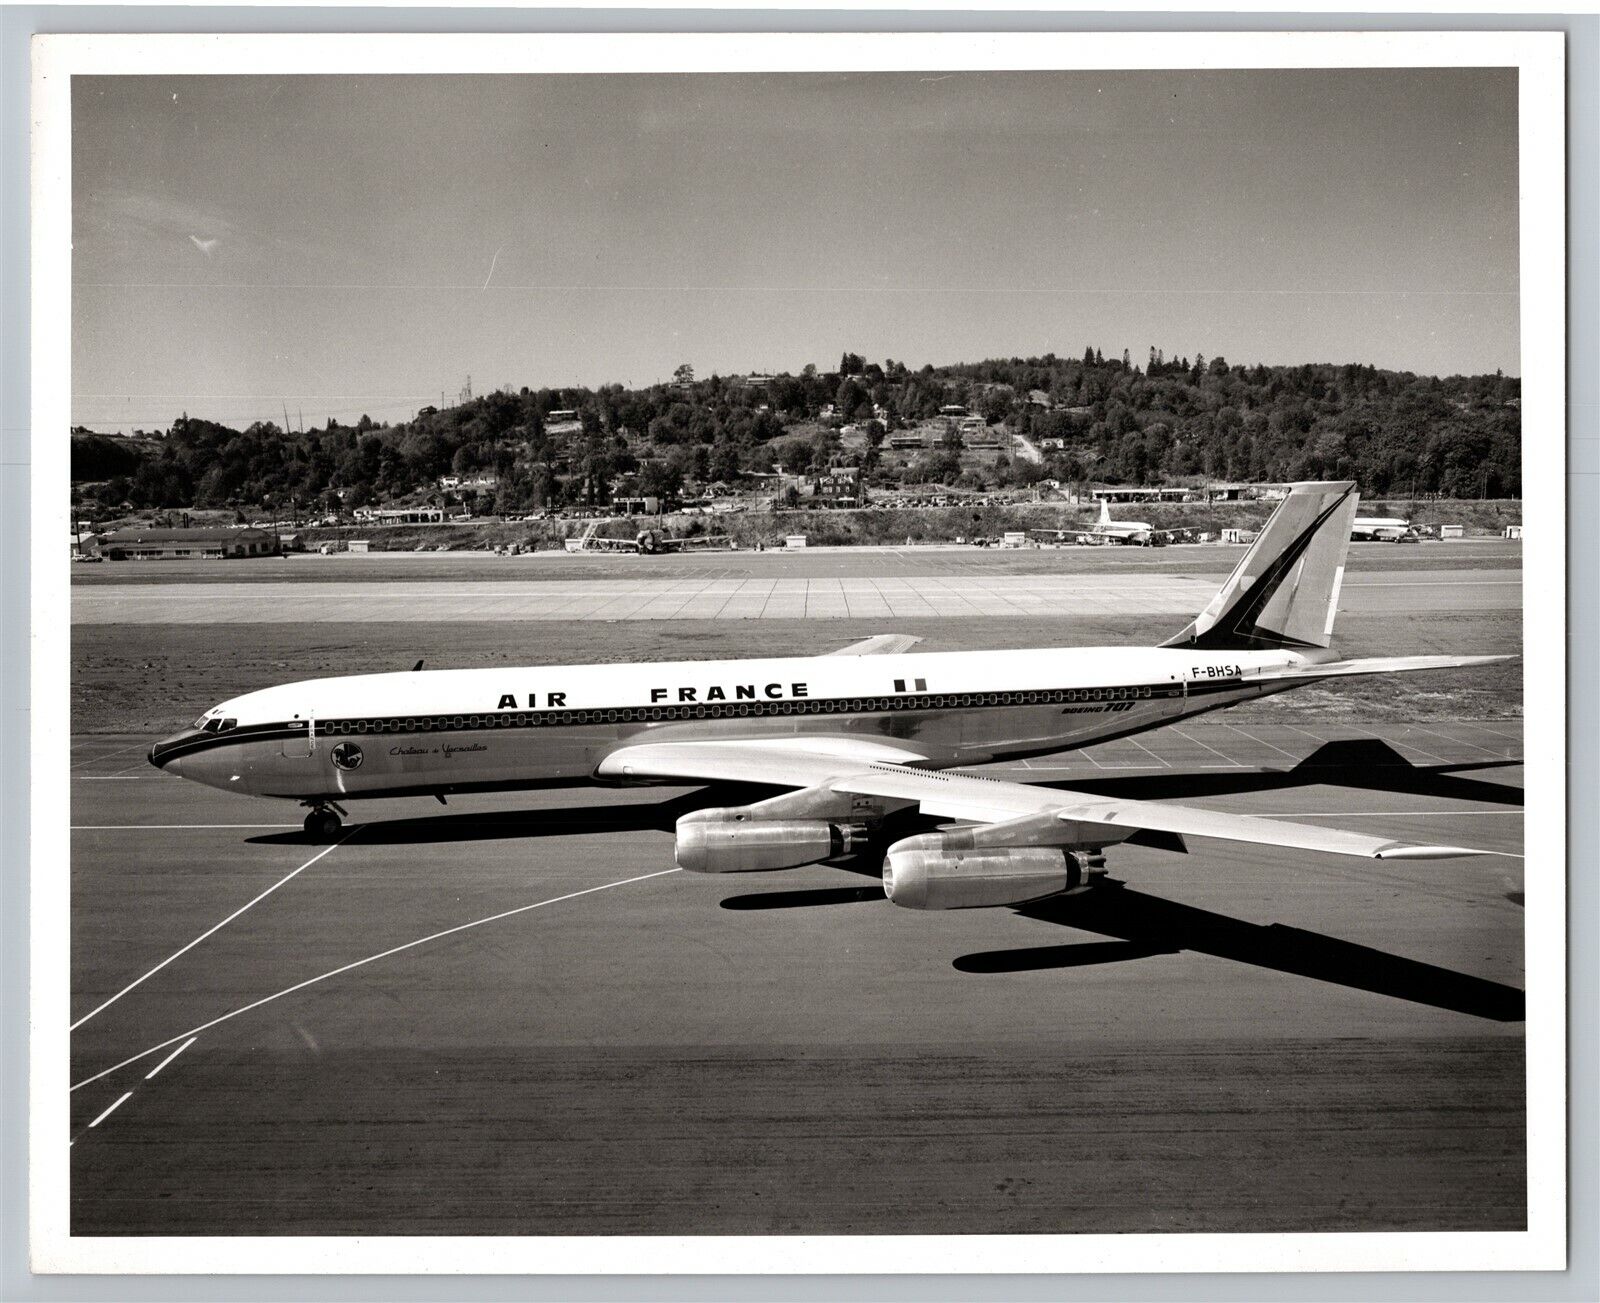 Aviation Airplane Air France Airlines Boeing 707 1960s B&W 8x10 Photo C2